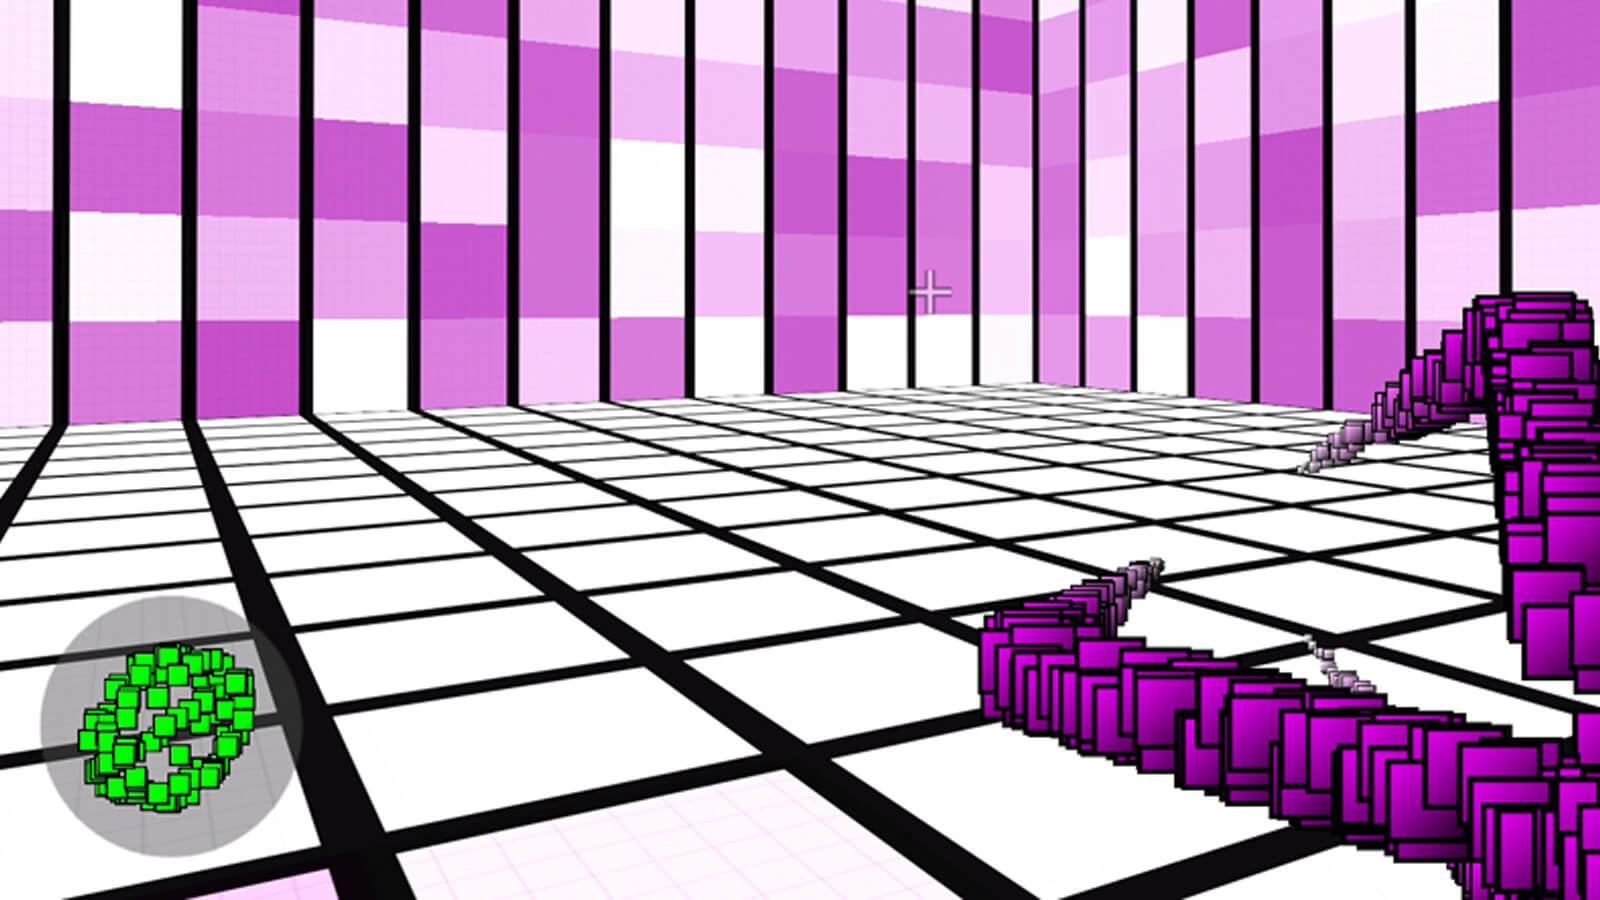 A grid-based room composed of white, pink, and purple squares